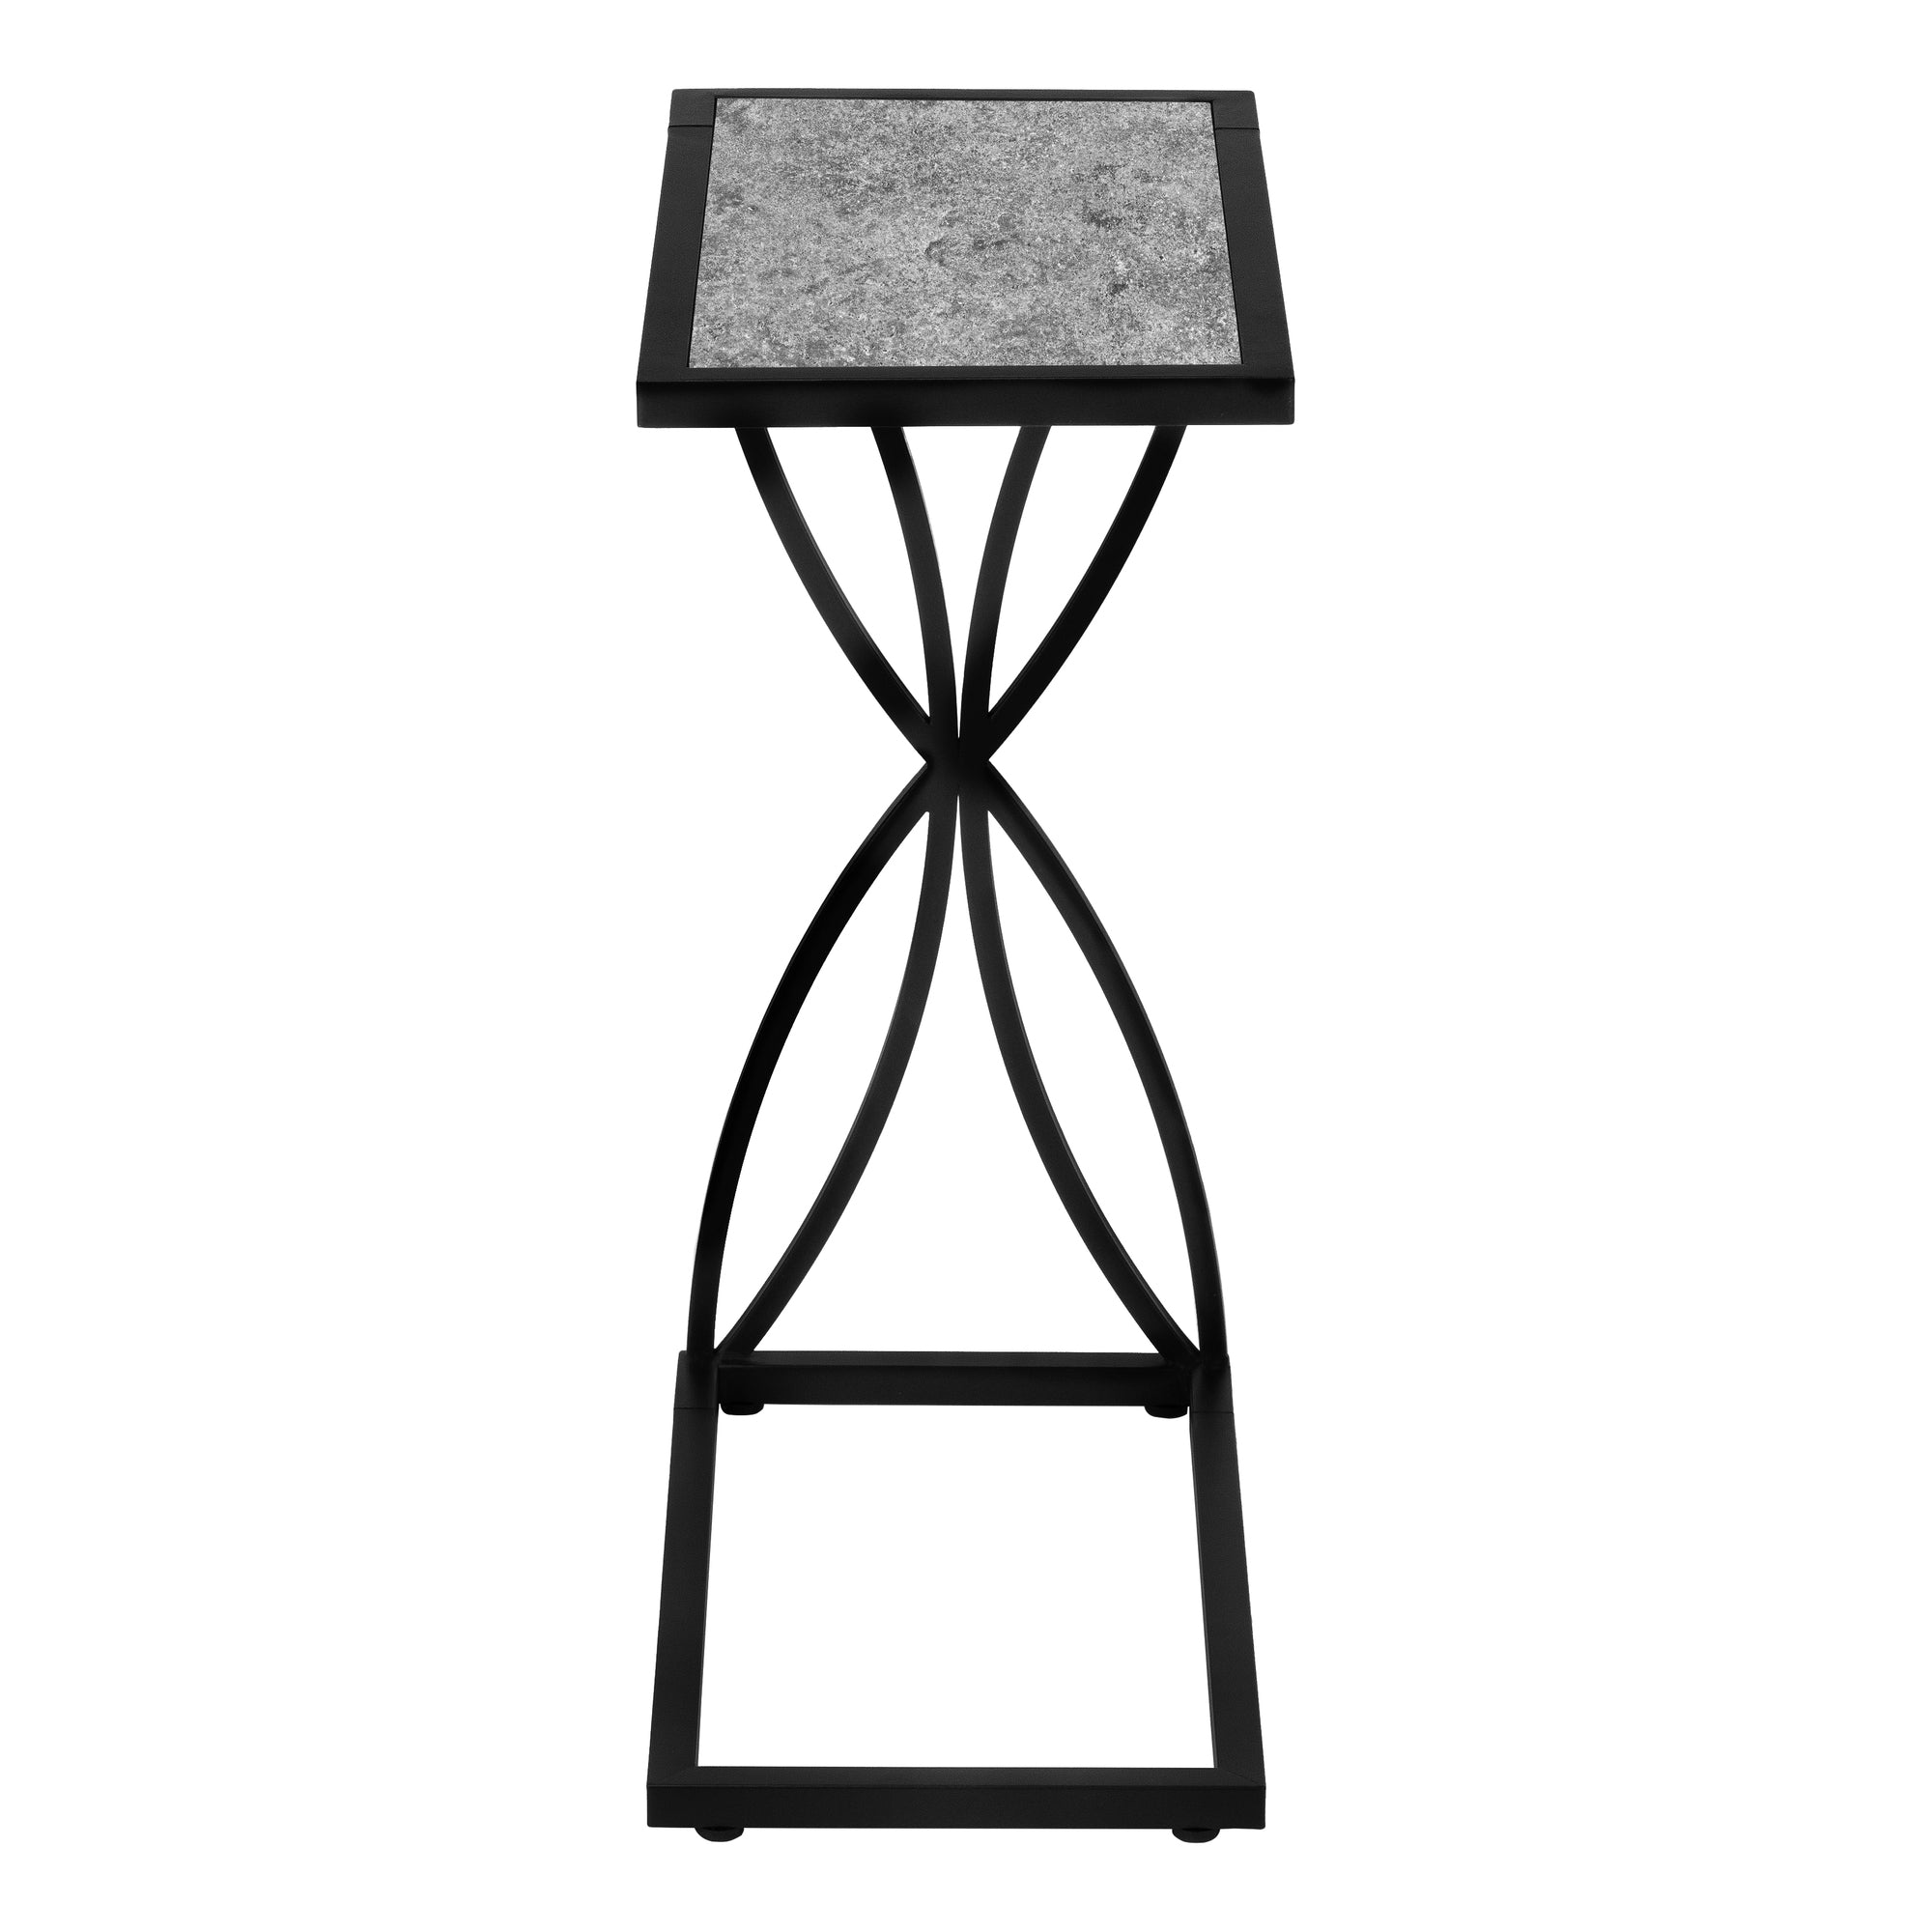 MN-233305    Accent Table, C-Shaped, End, Side, Snack, Living Room, Bedroom, Metal Frame, Laminate, Grey Stone Look, Black, Contemporary, Modern